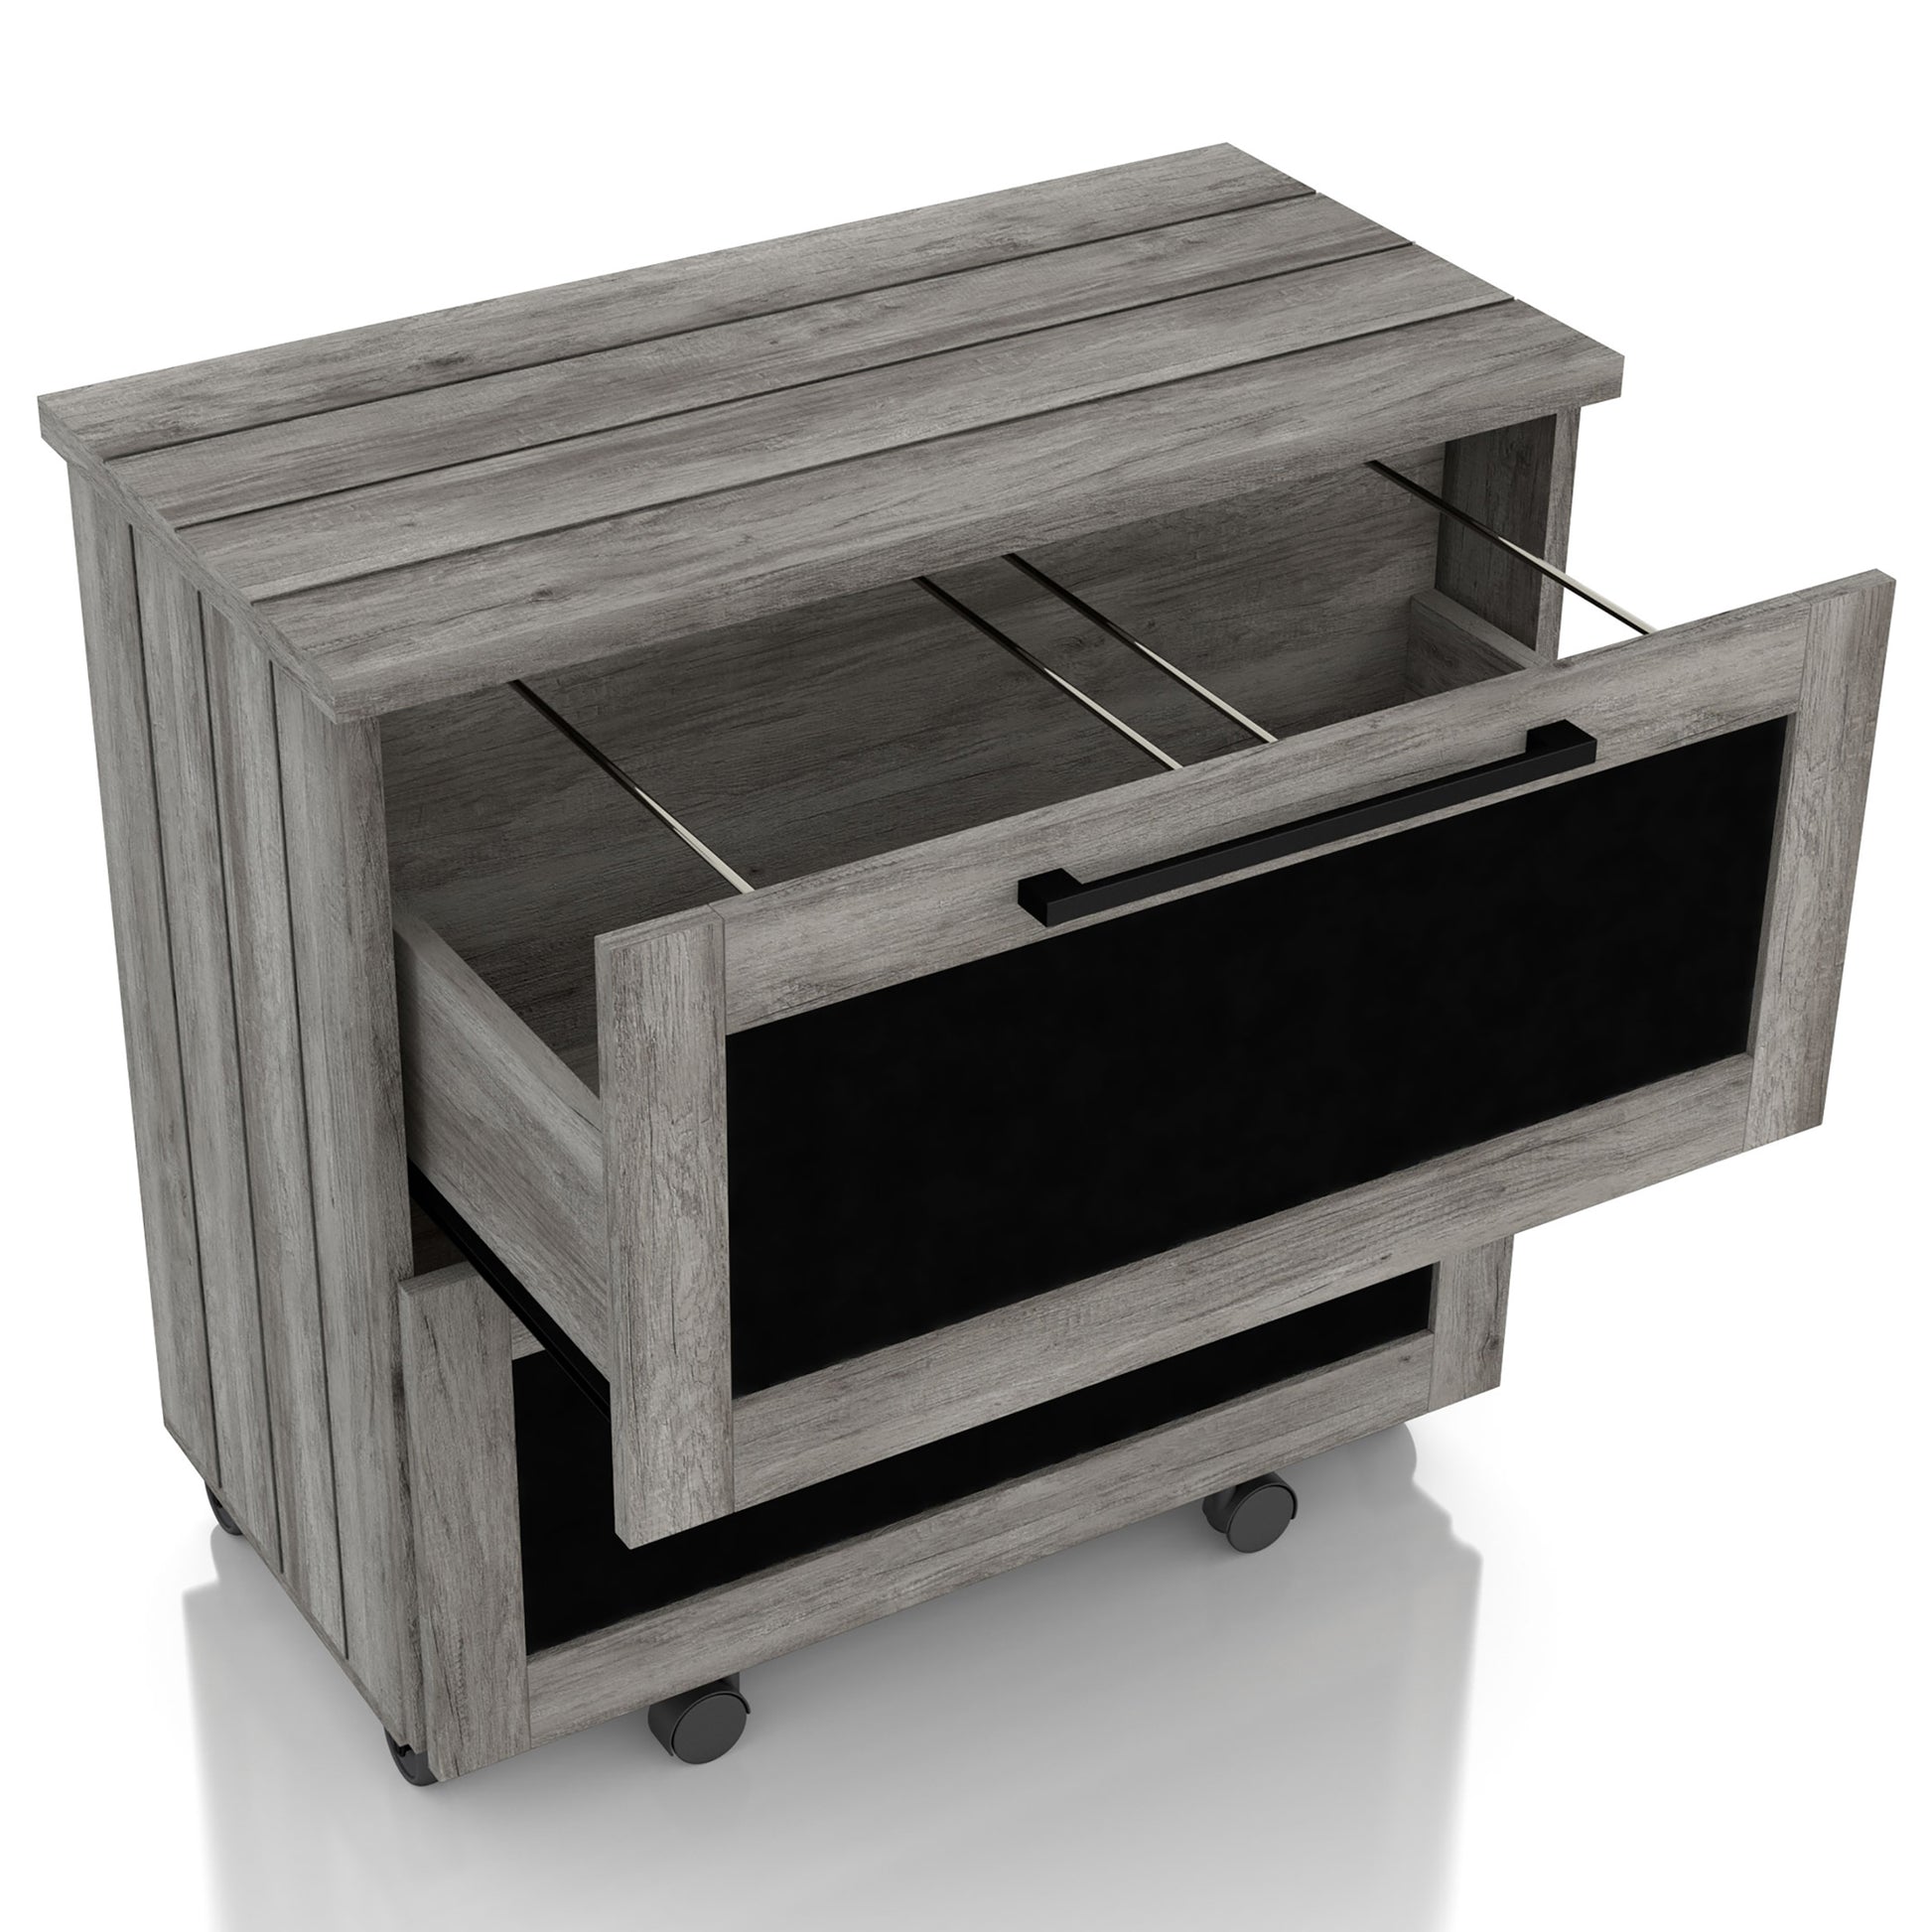 Right angled rustic vintage gray oak two-drawer mobile filing cabinet with chalkboard drawer fronts and top drawer open on a white background